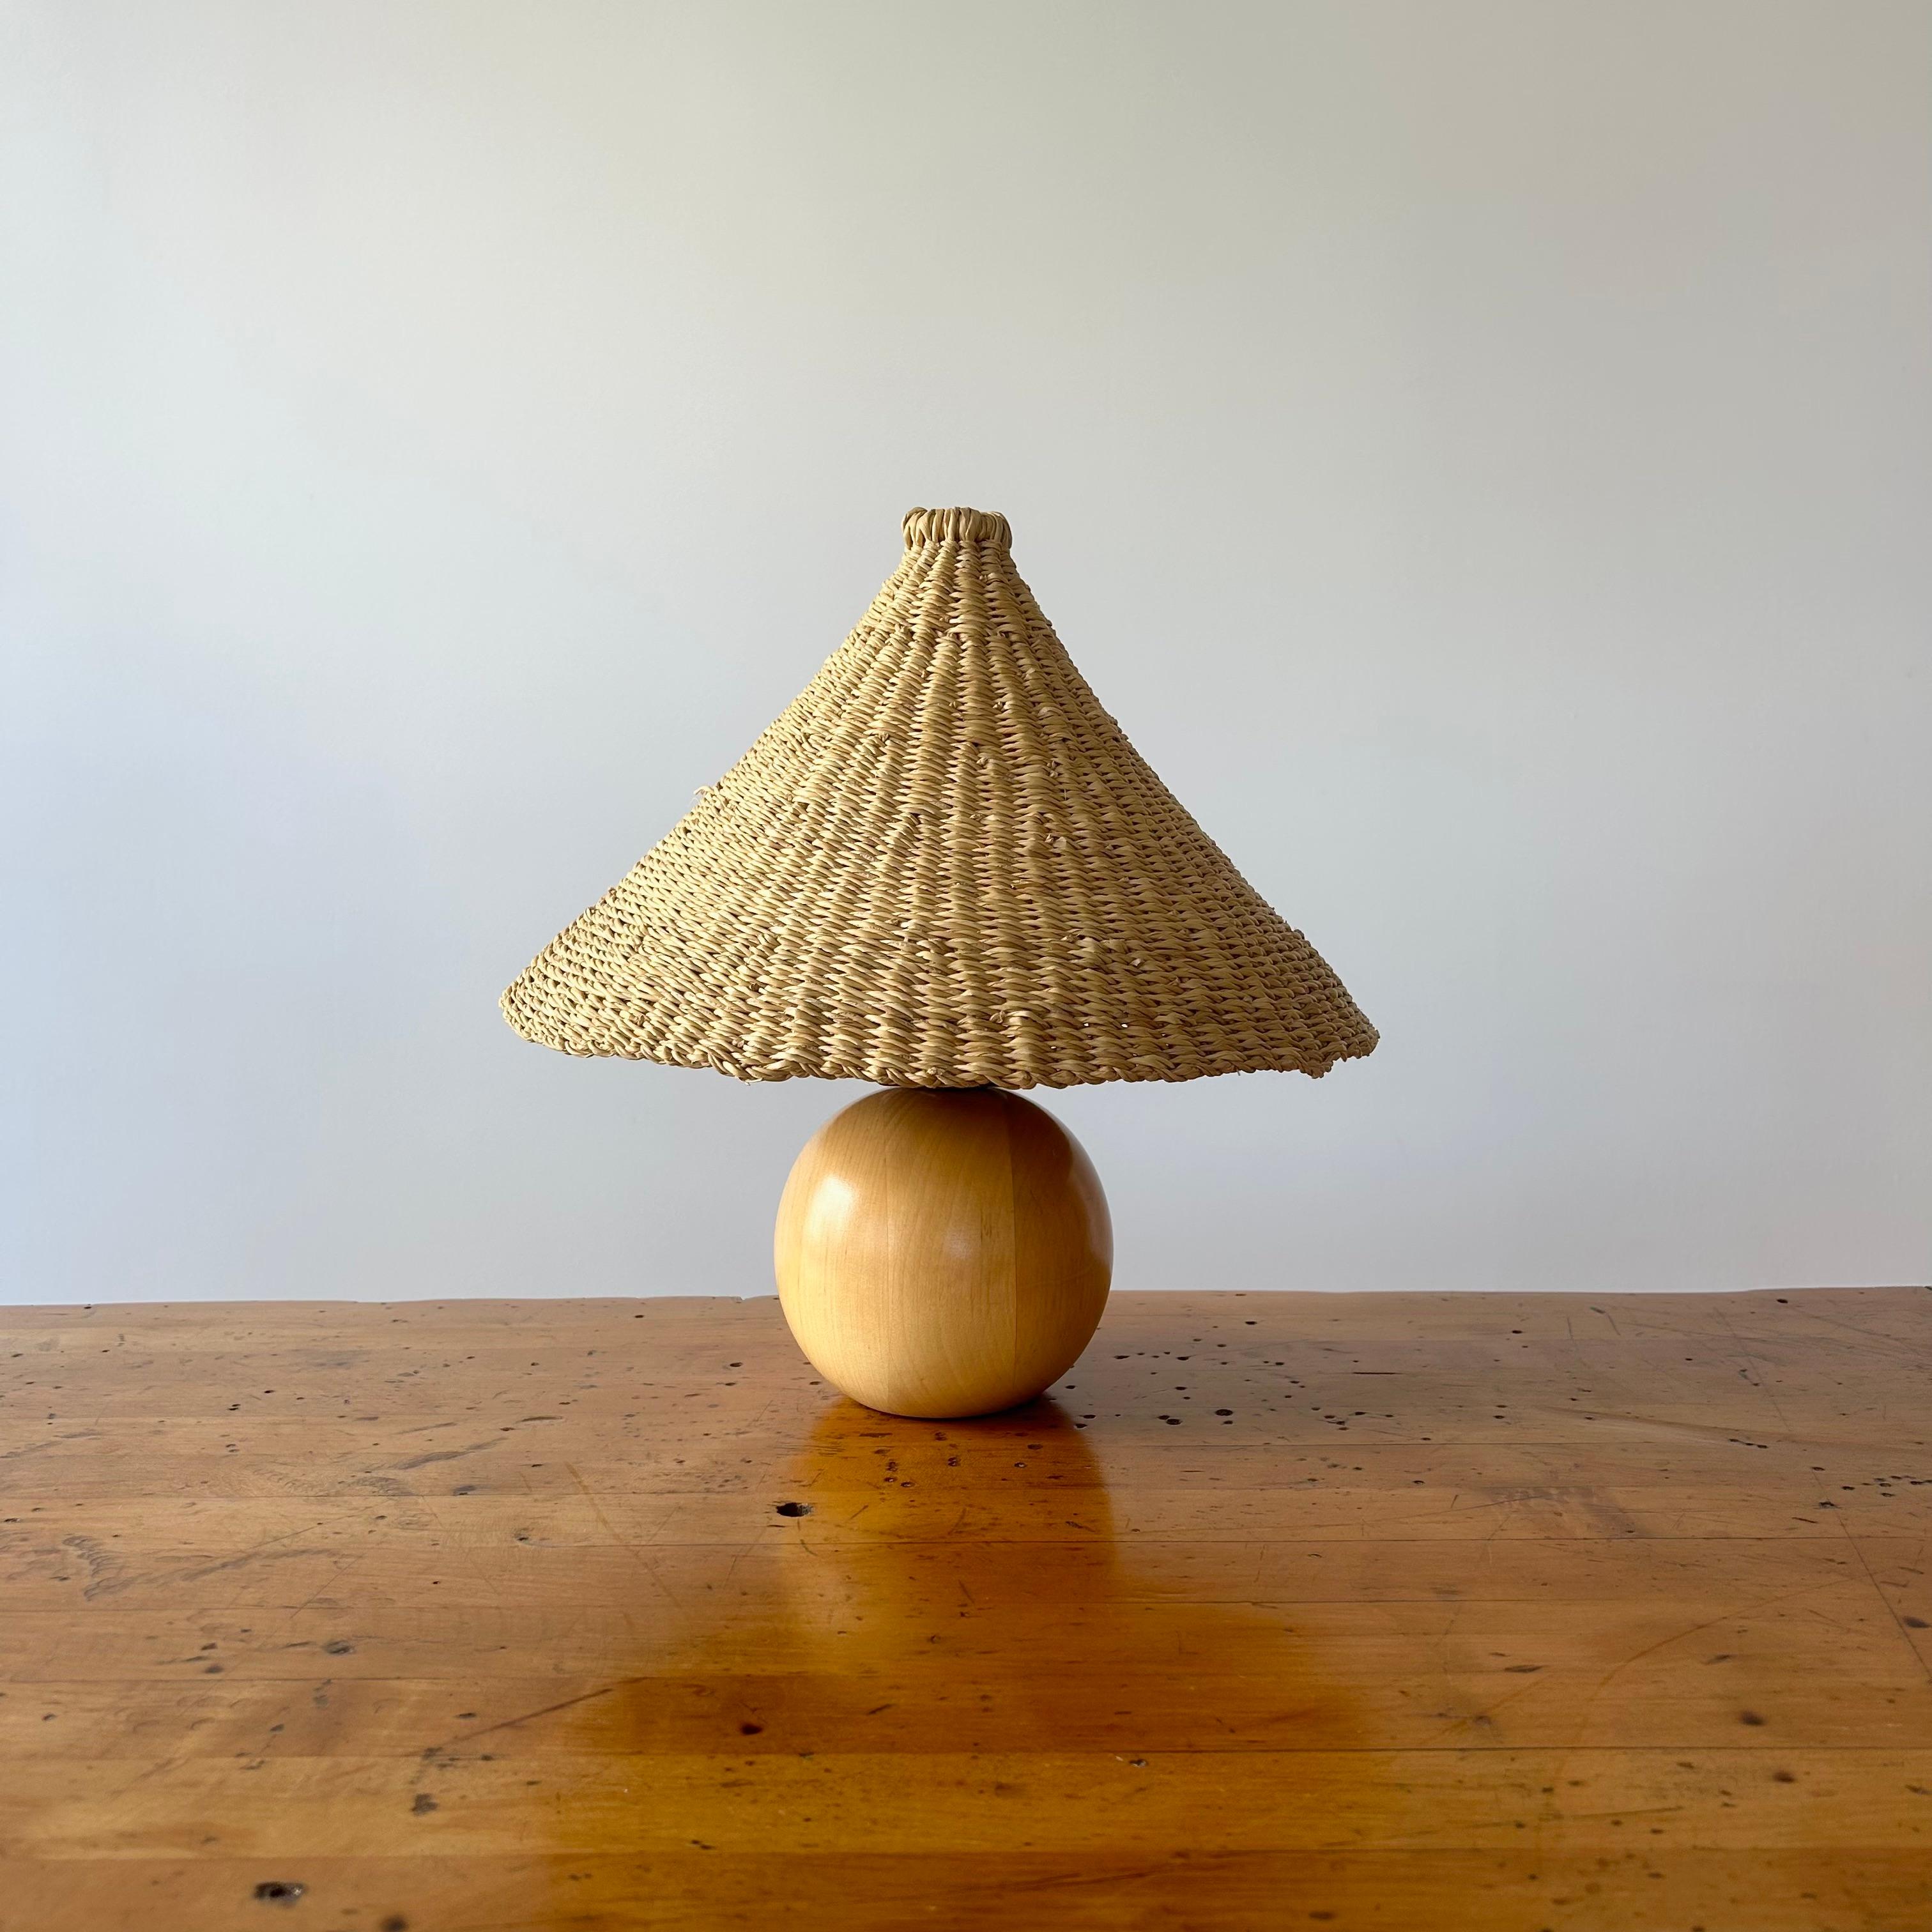 Sweetly sized vintage oak table lamp from the Netherlands circa 1980s. Good vintage condition. Rewired in LA and refreshed with our elephant grass shade. One available. 

The light shade was handwoven by a women's organization for traditional arts